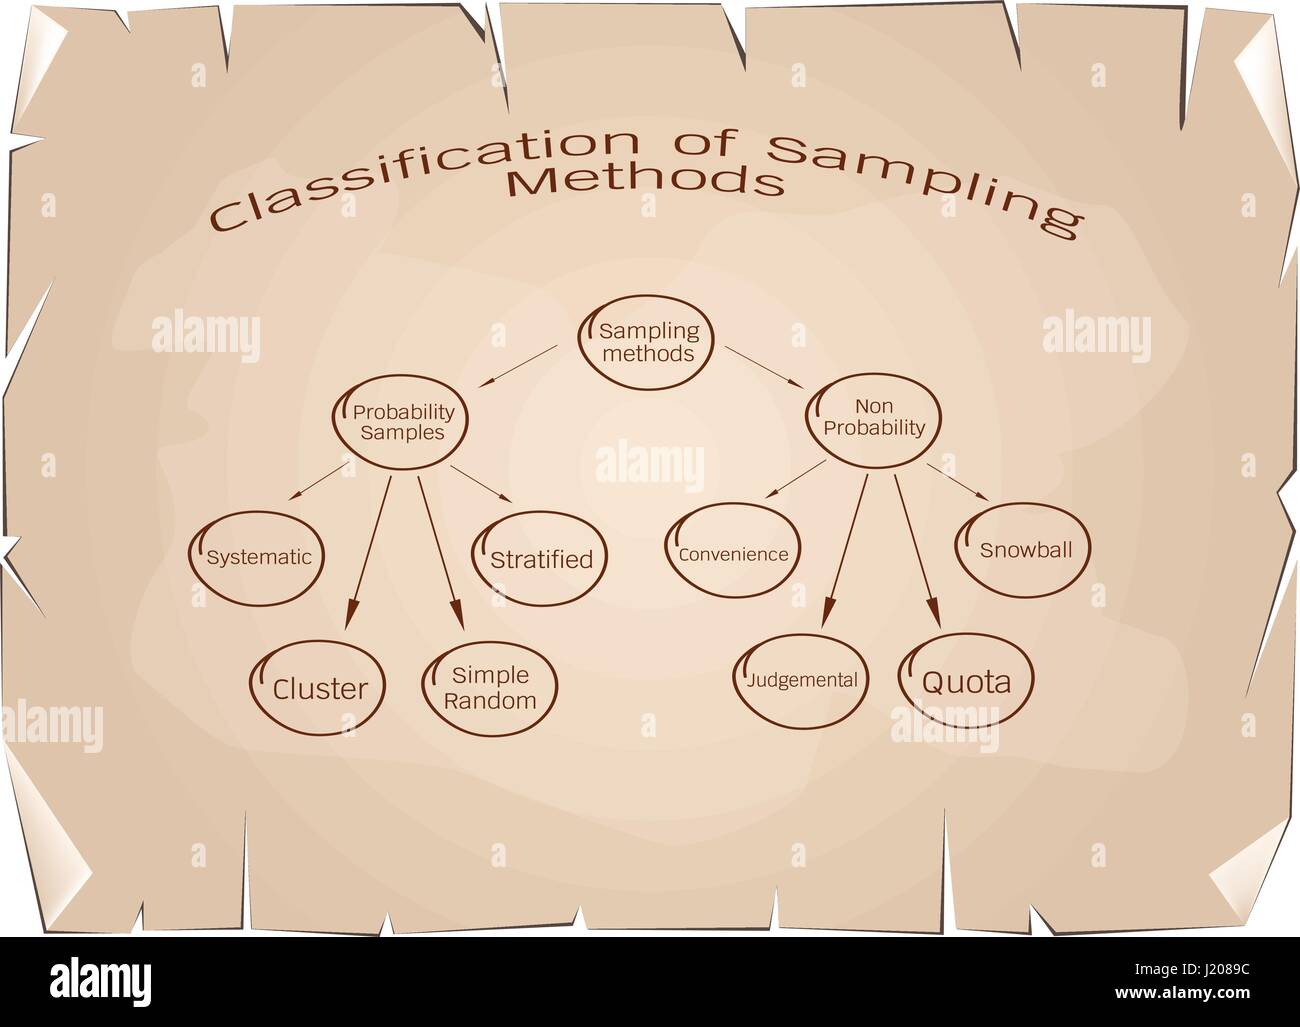 Business and Marketing or Research Process, Classification of Sampling Methods The Probability and Non-Probability Sampling in Qualitative Research on Stock Vector